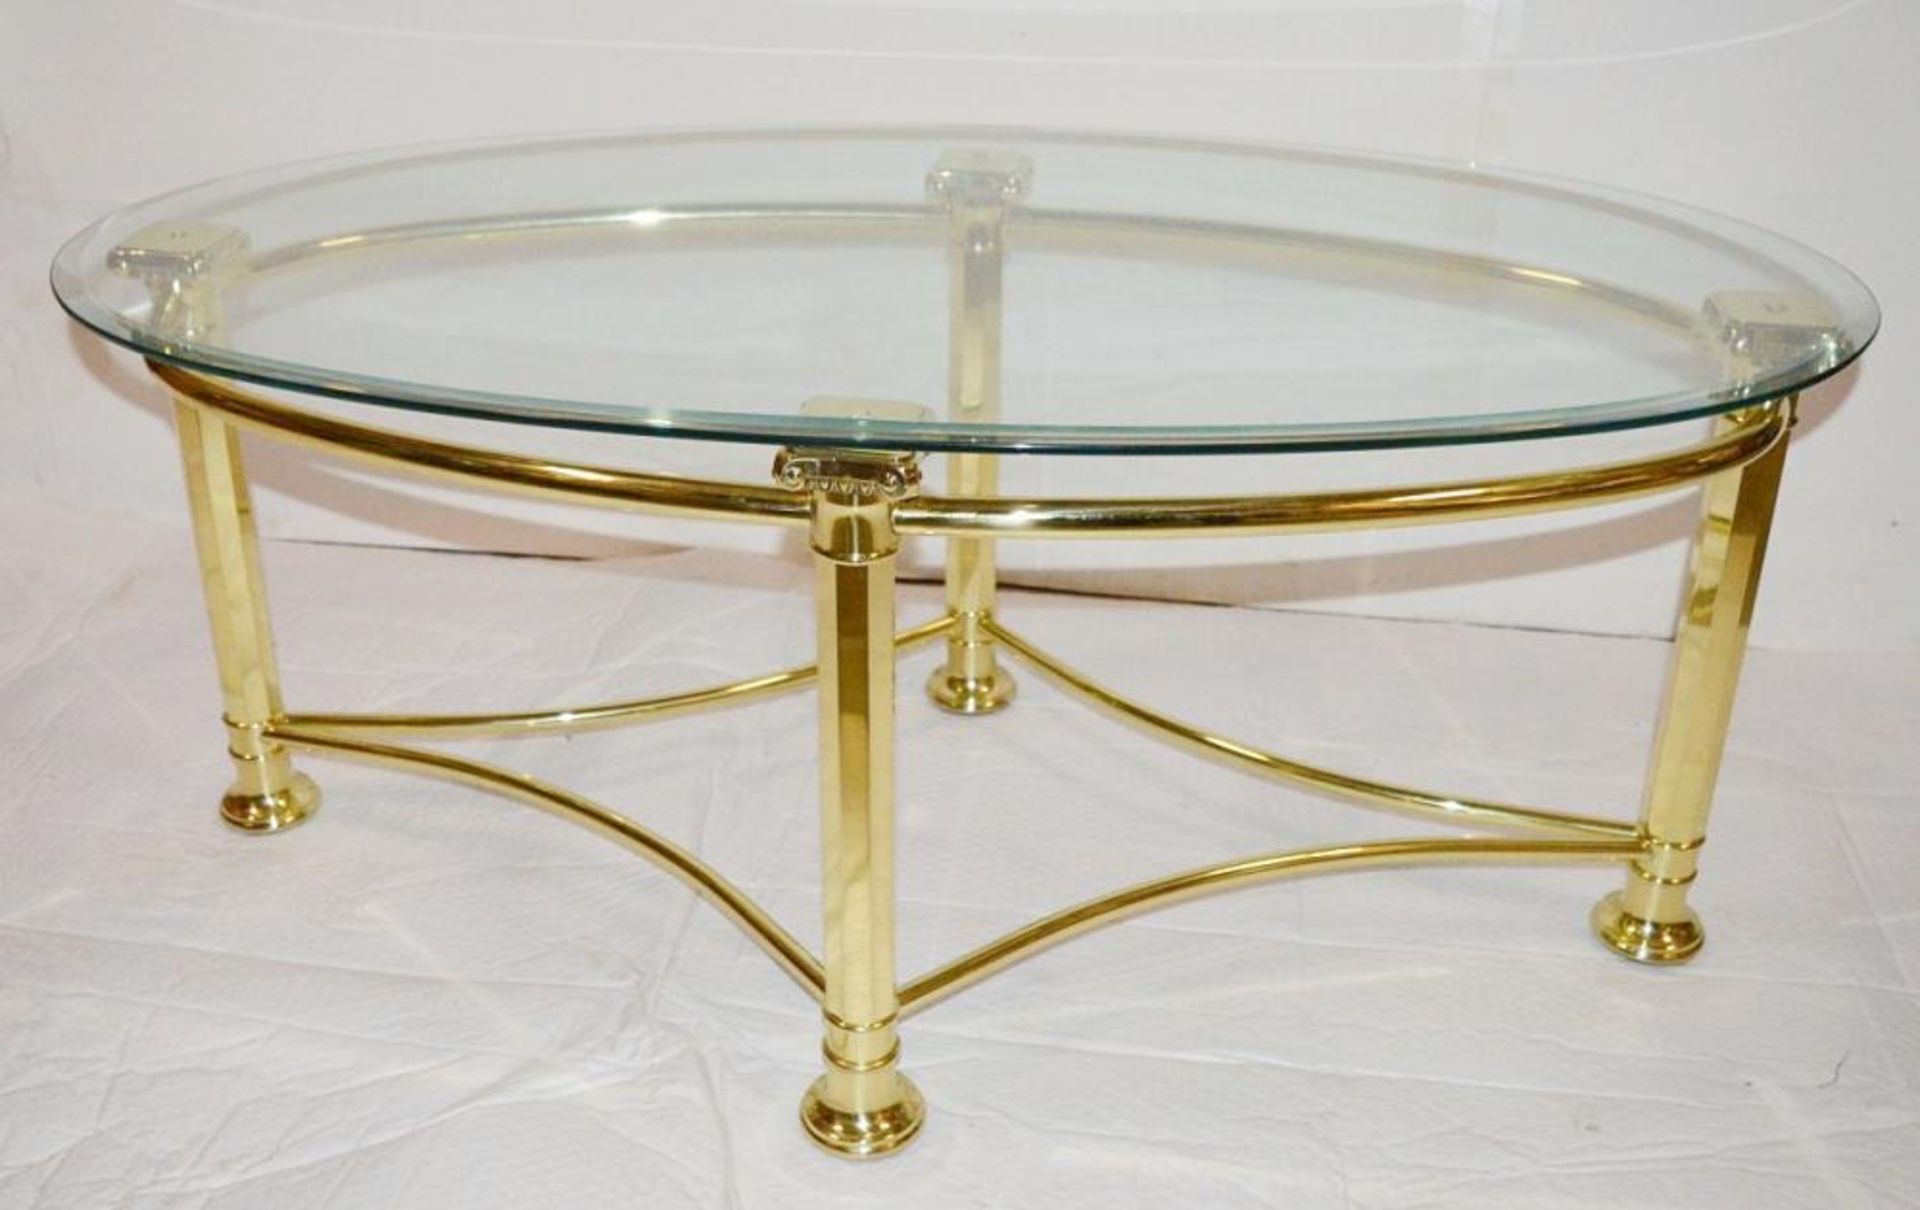 1 x Chelsom “Roman” Polished Brass Oblong Coffee Table - Ex-Display **£1 Start, No Reserve** - Image 2 of 2